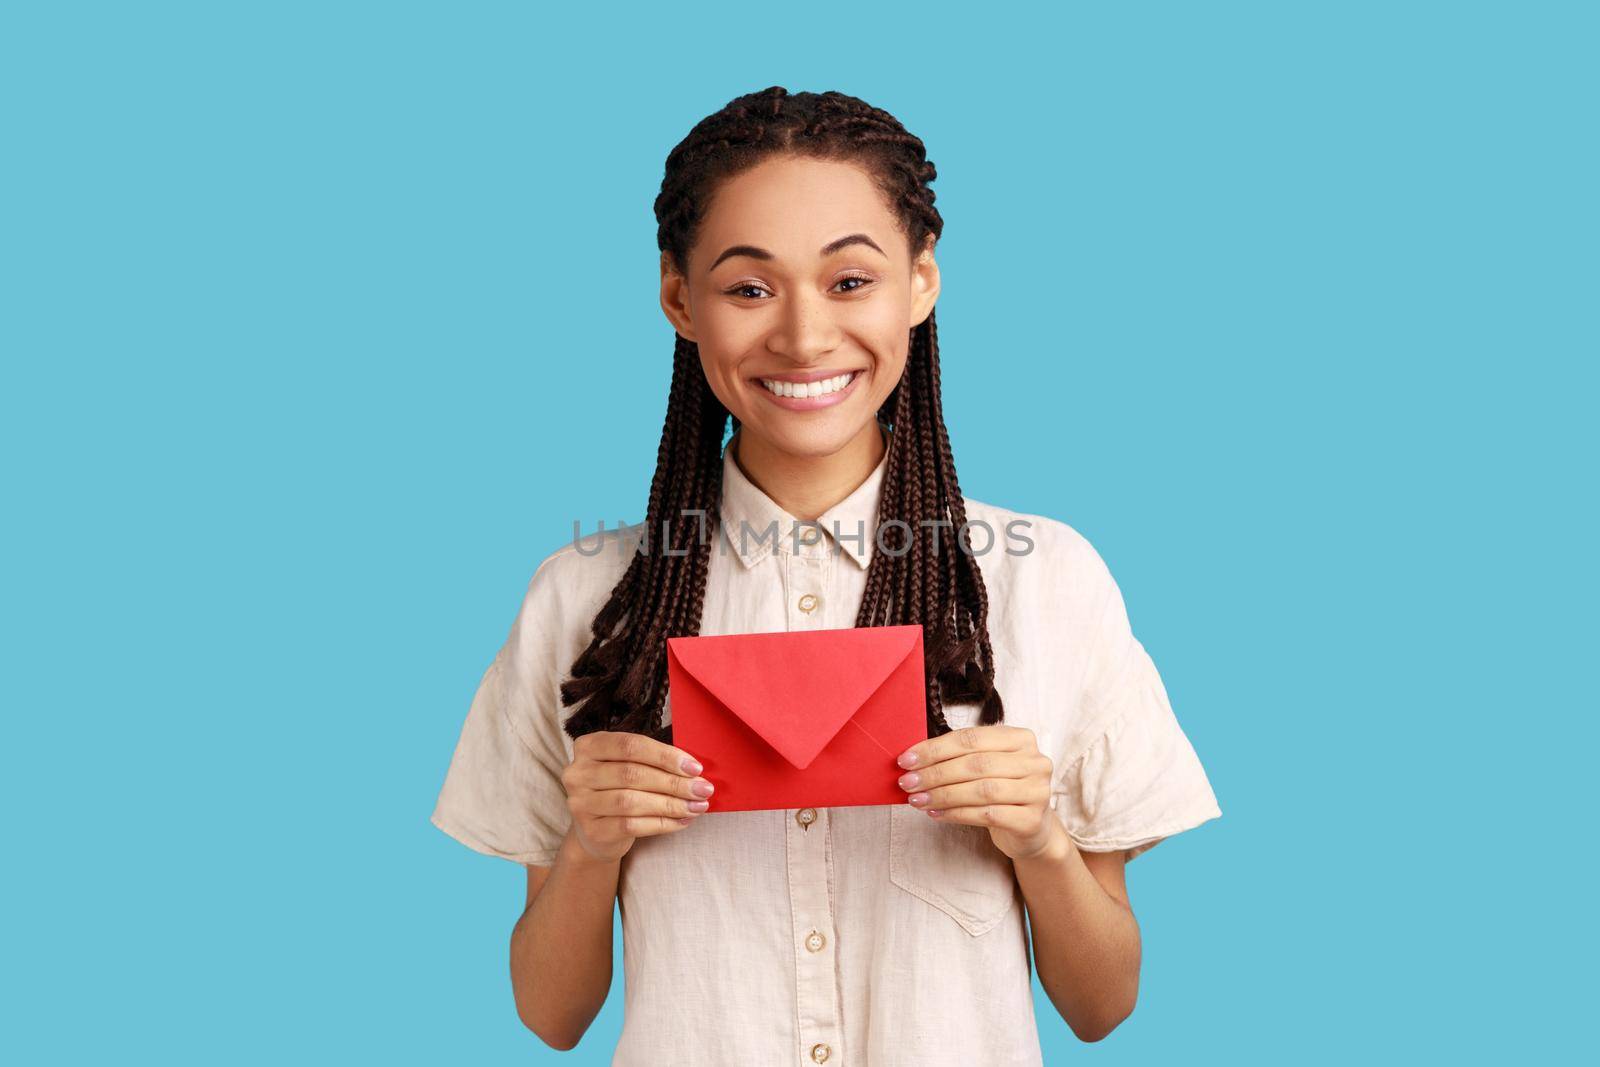 I got love letter on Valentine's day. Happy beautiful woman with black dreadlocks holding letter in red envelope or greeting card and smiling joyfully. Indoor studio shot isolated on blue background.